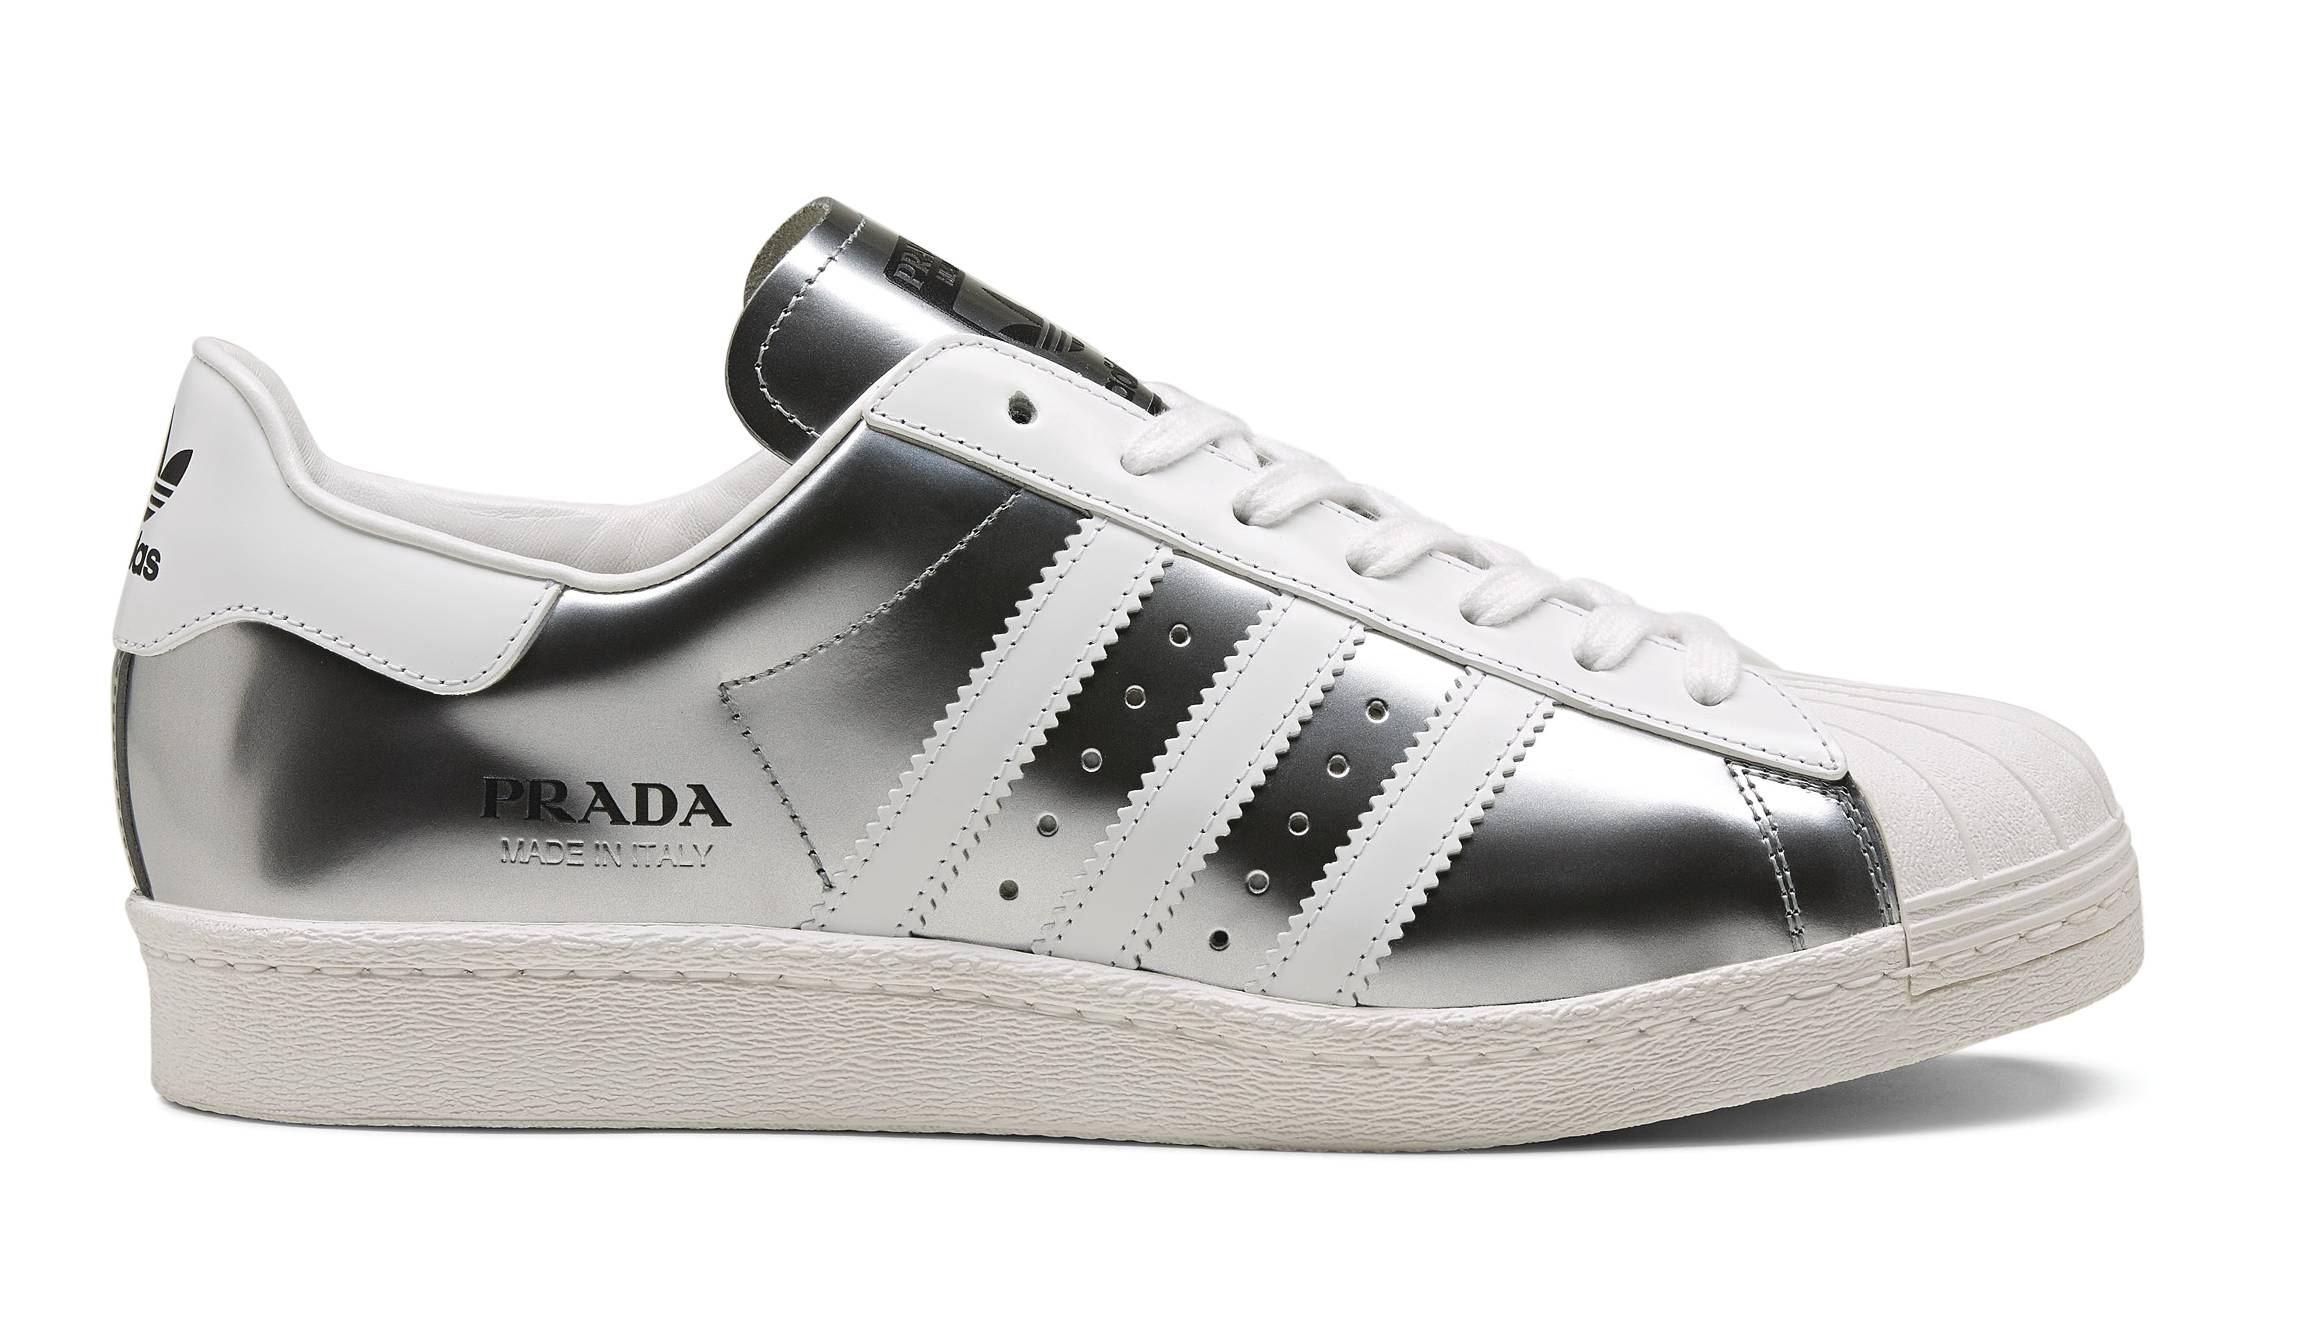 Prada x Adidas sneaker from Orchard Mile